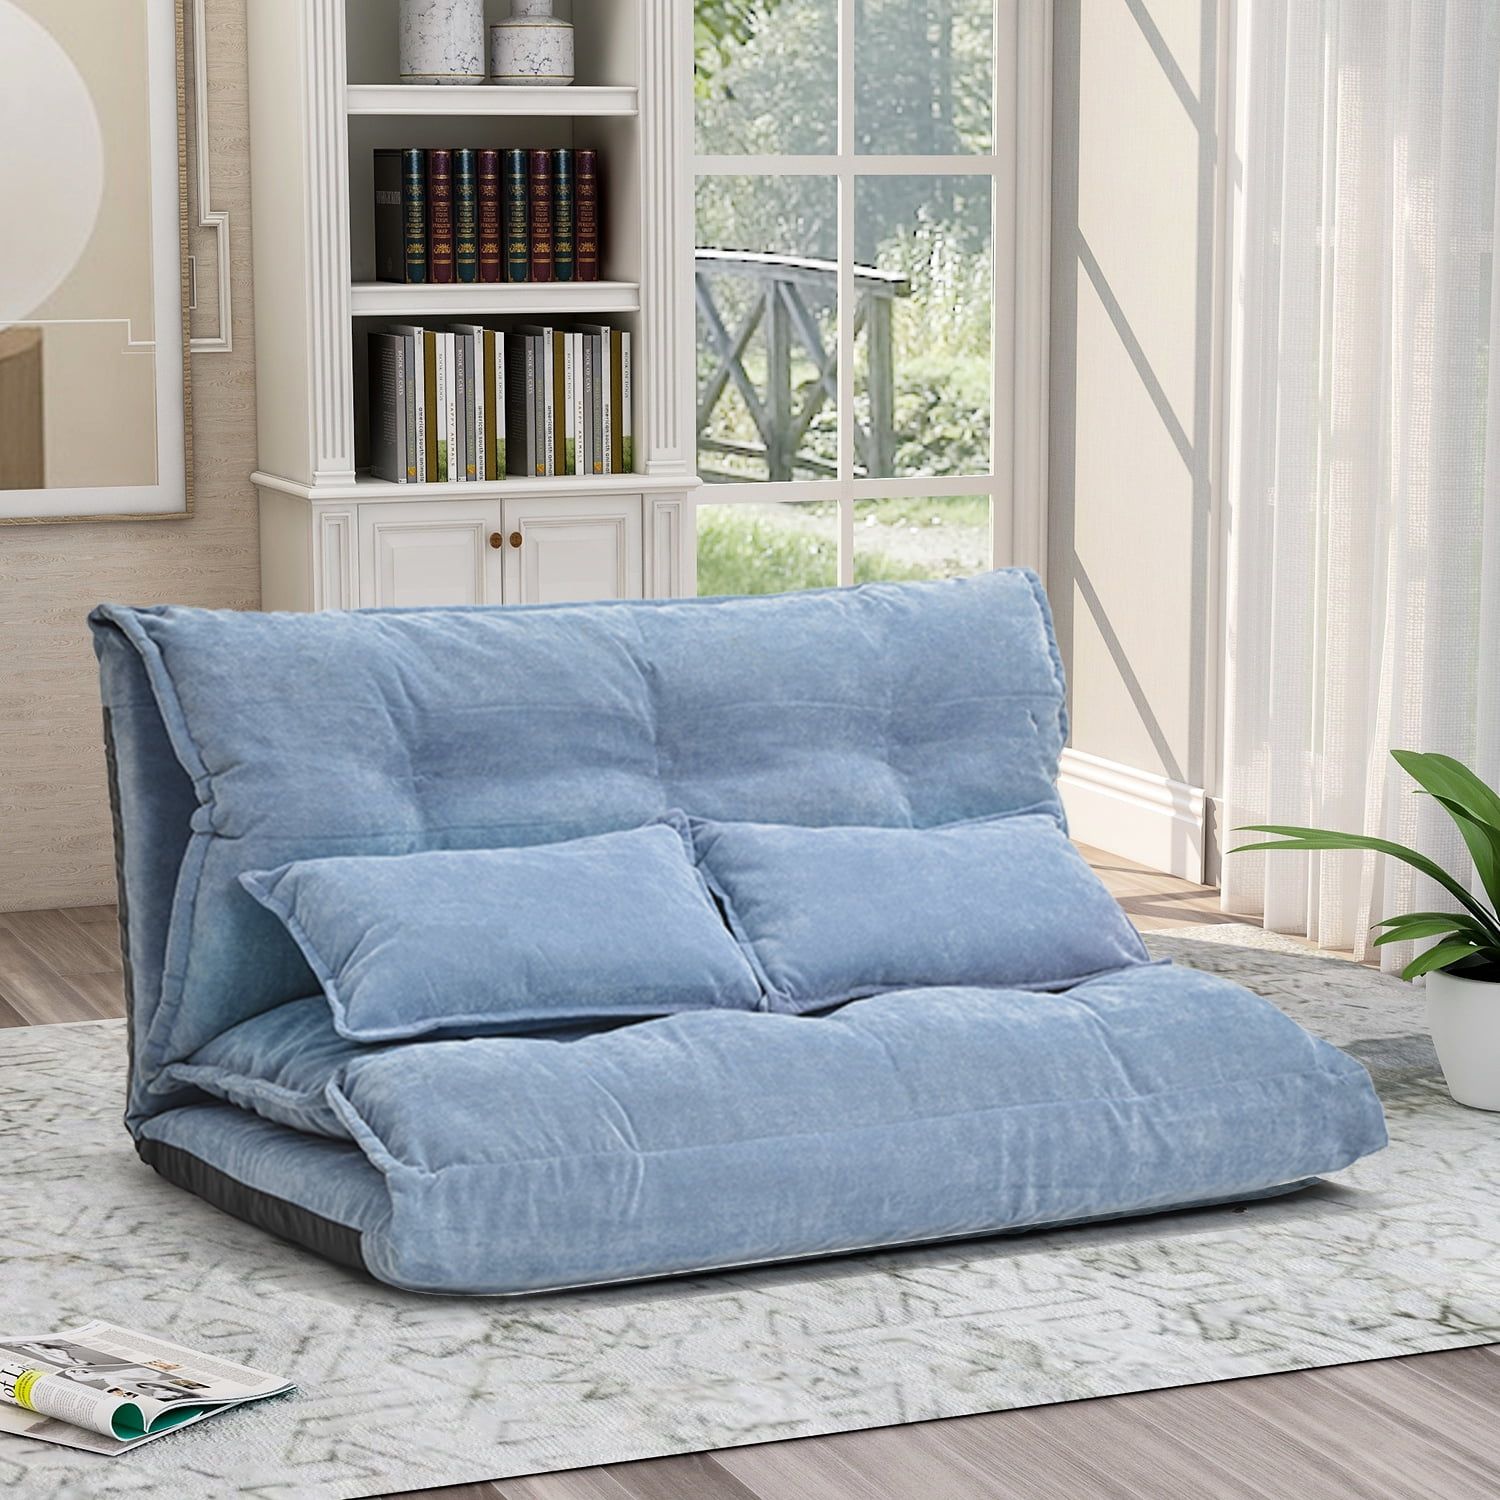 Blue Home Sofa Bed Adjustable Folding Futon Sofa Leisure Sofa Bed With Intended For Adjustable Backrest Futon Sofa Beds (Gallery 17 of 20)